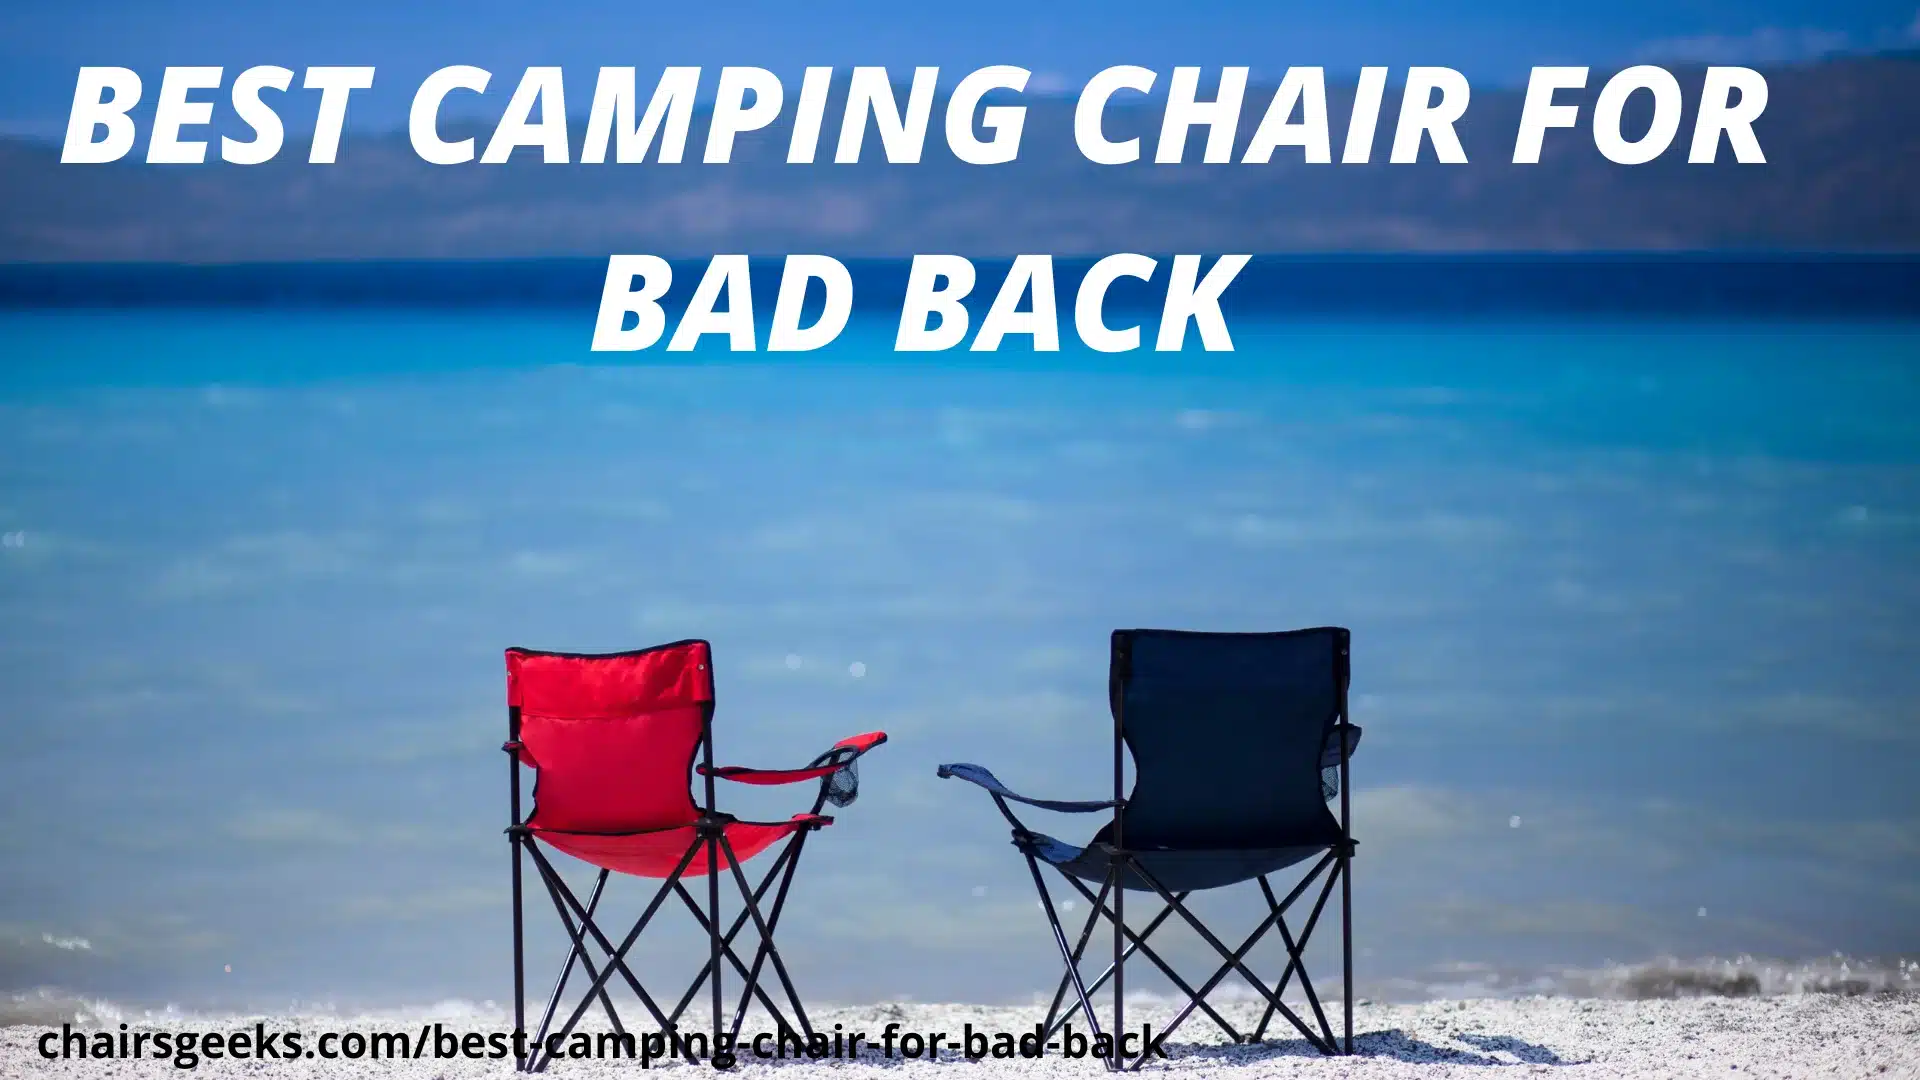 Best Camping Chair For Bad Back